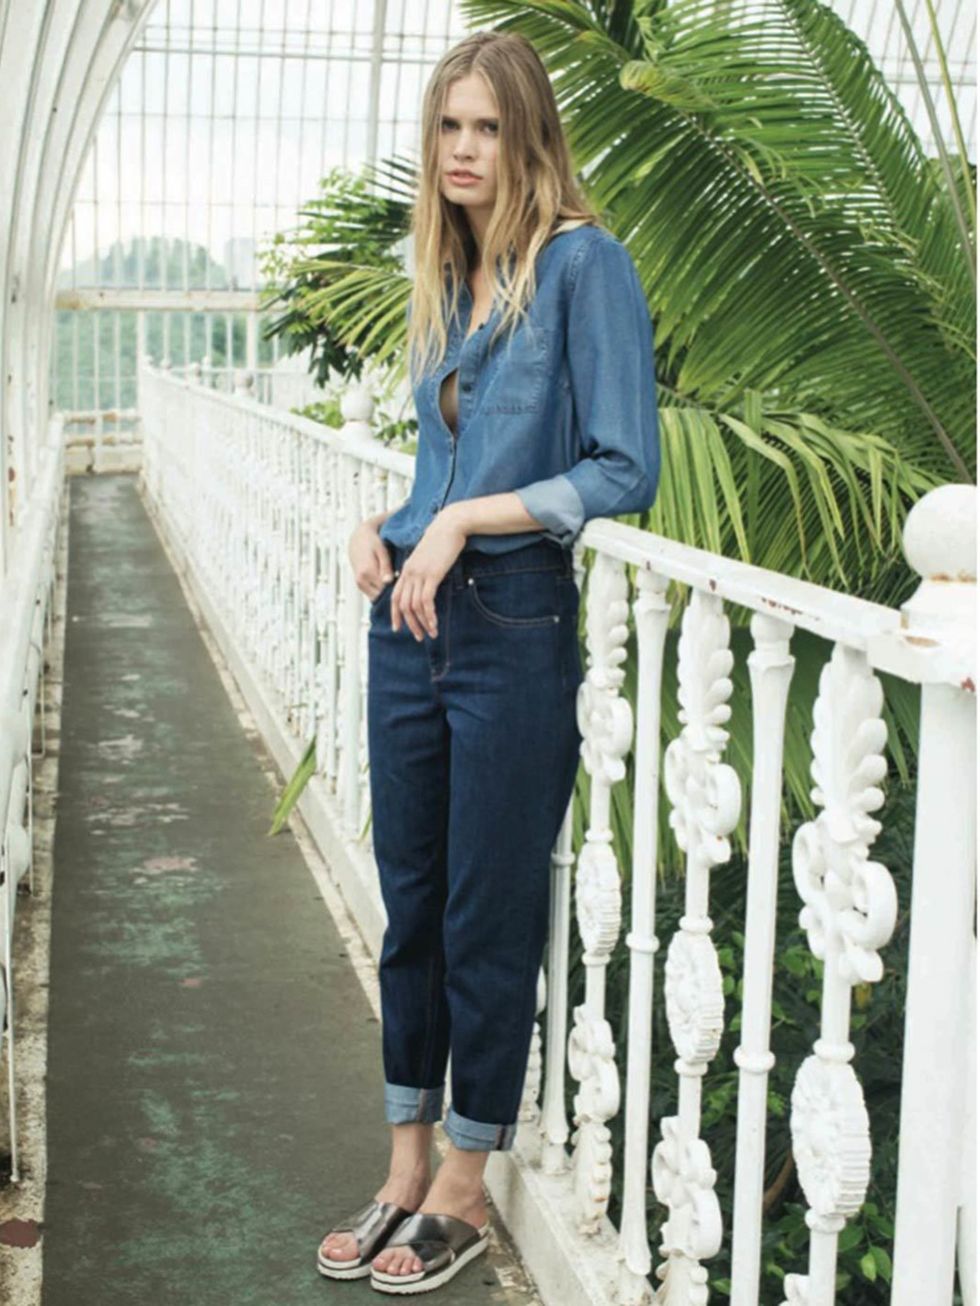 <p>We can't get enough of Wåven (pronounced woven), the denim label making waves with it's slick, stylishly simple denim separates. It's London based with a Scandi vibe - a winning combination.</p>

<p><a href="http://www.urbanoutfitters.com/uk/catalog/ca